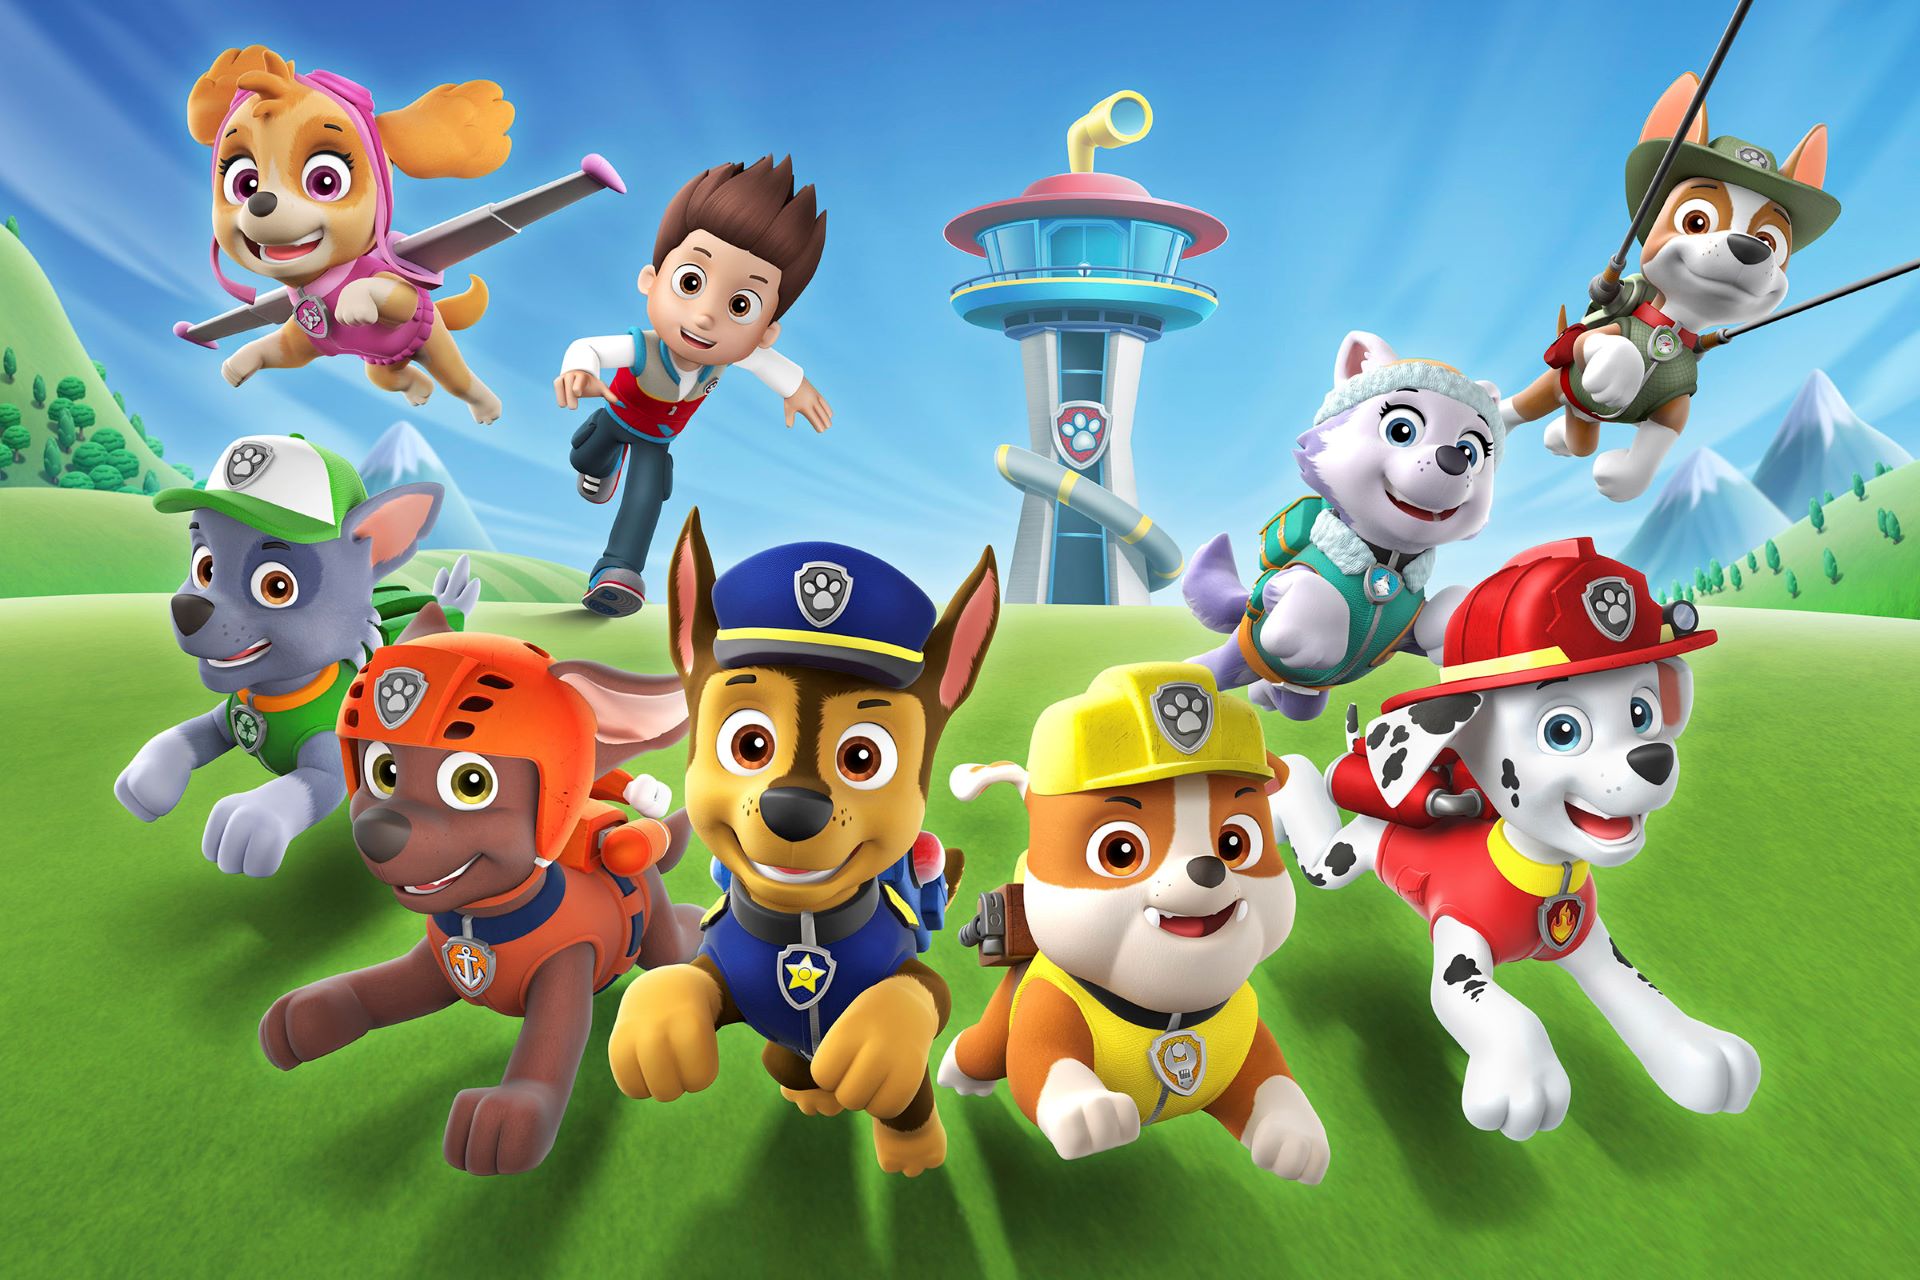 A promotional shot of the Nickelodeon animated children's series, Paw Patrol